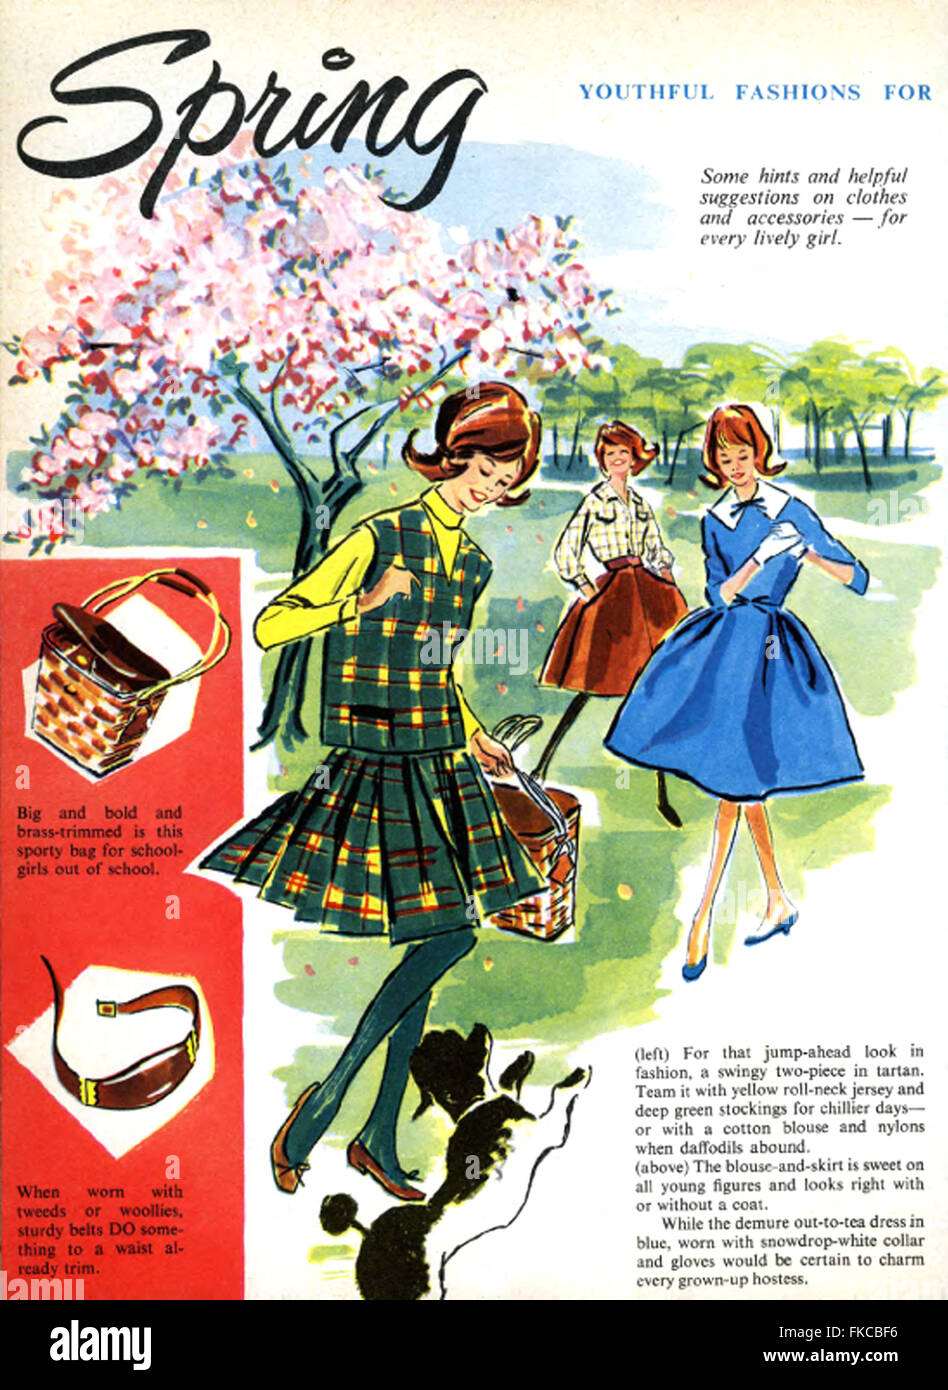 Fashion plates of the latest styles complete with sample fabric from a book  sent only to retailers to choose their seasonal collections. Poster Print  by Fashion Frocks - Item # VARBLL0587219203 - Posterazzi